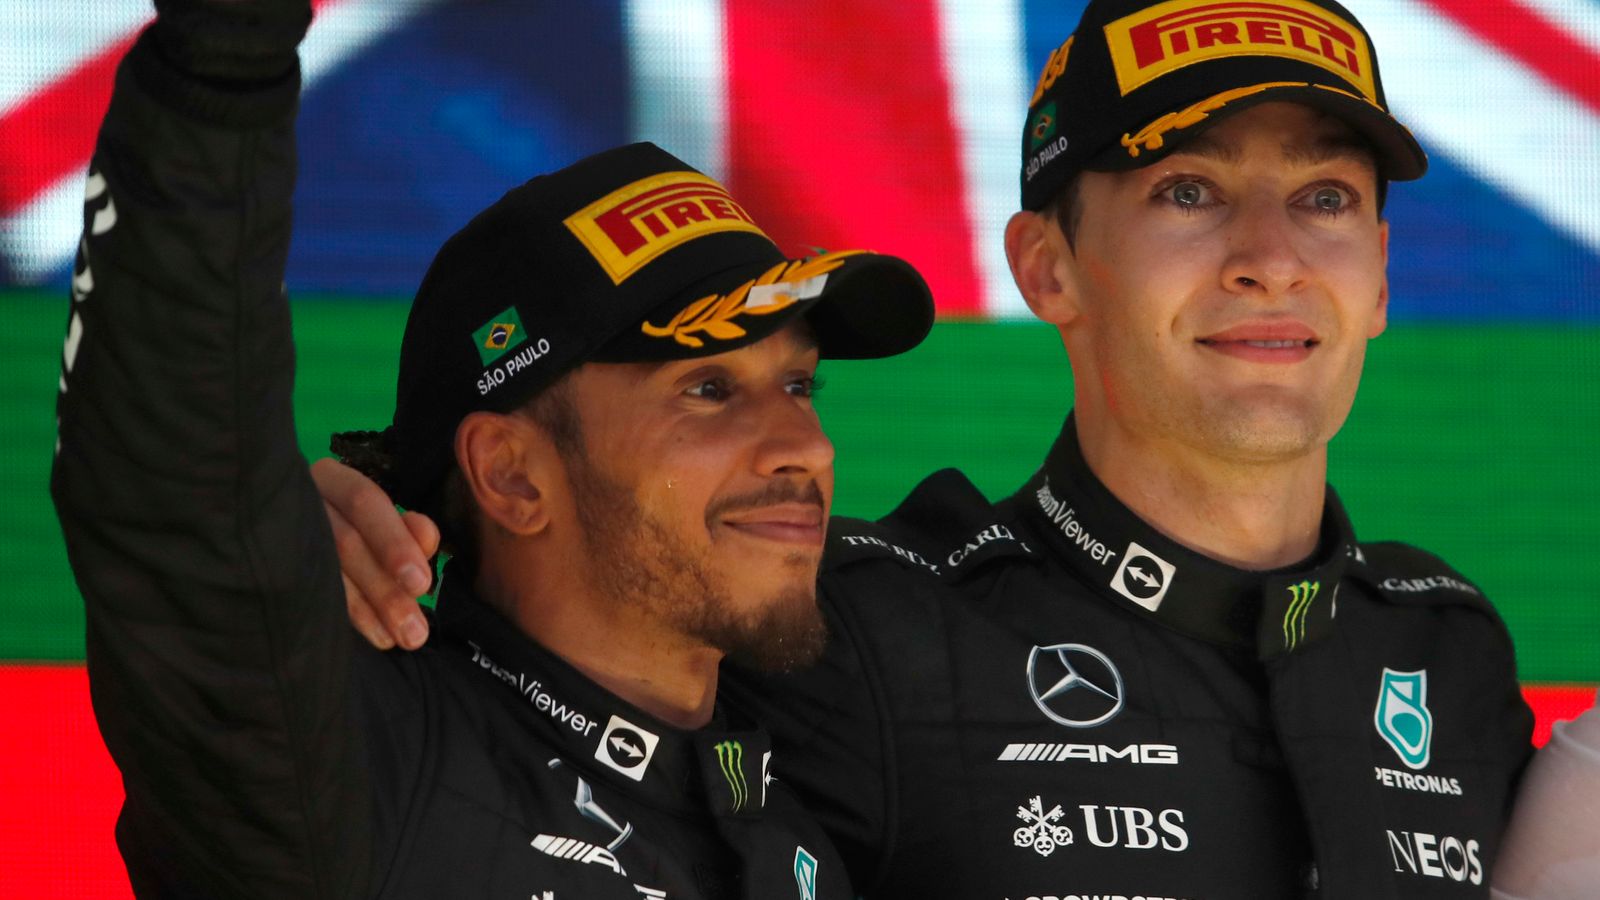 Mercedes back to scene of last win: Where are they at, can they win Brazil again?